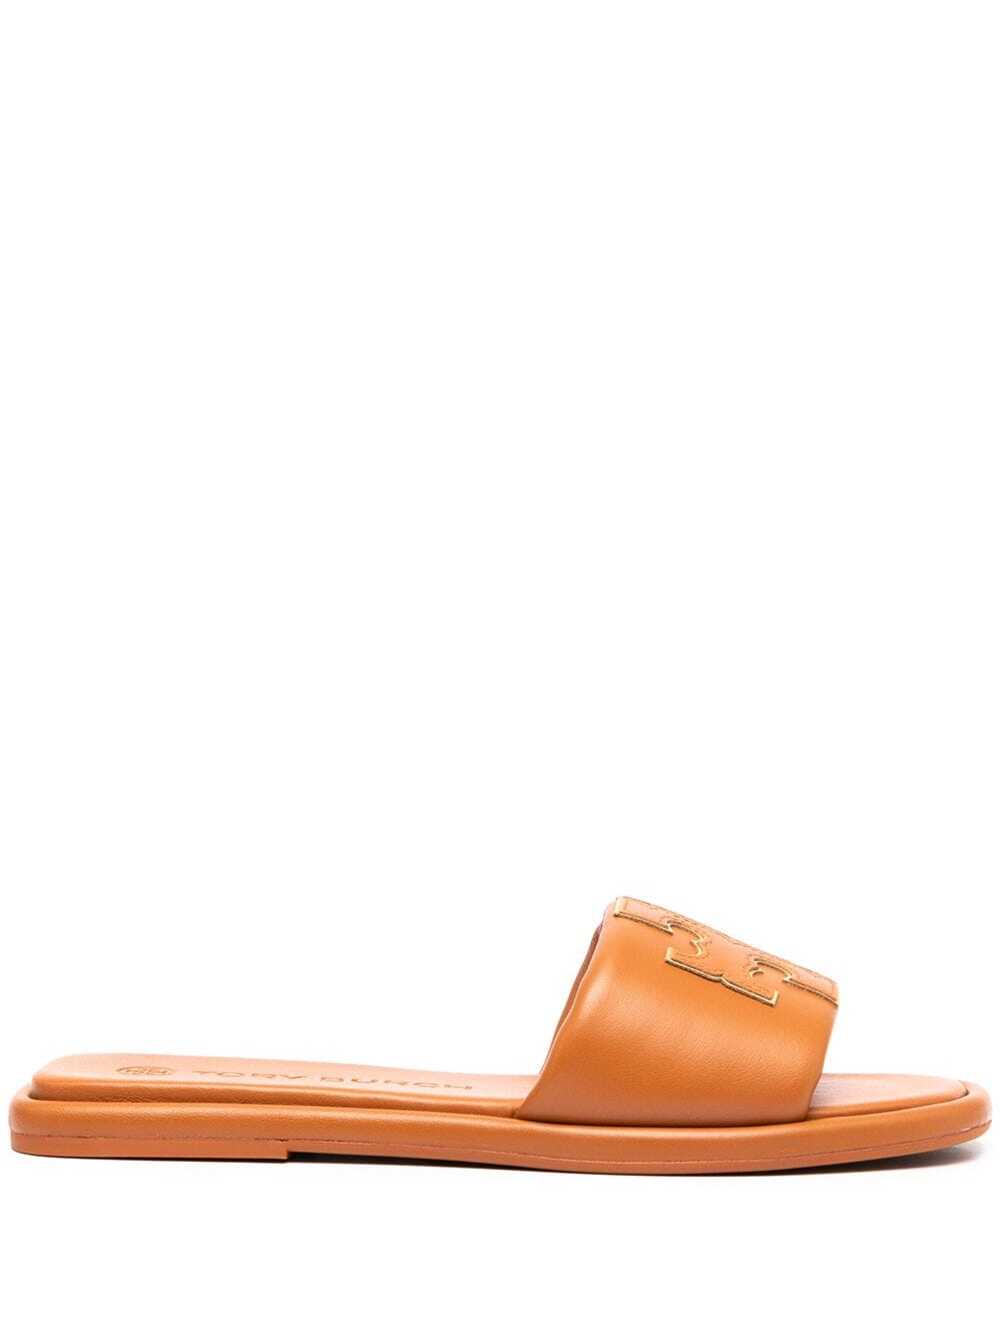 TORY BURCH LEATHER SLIDE SANDALS WITH LOGO